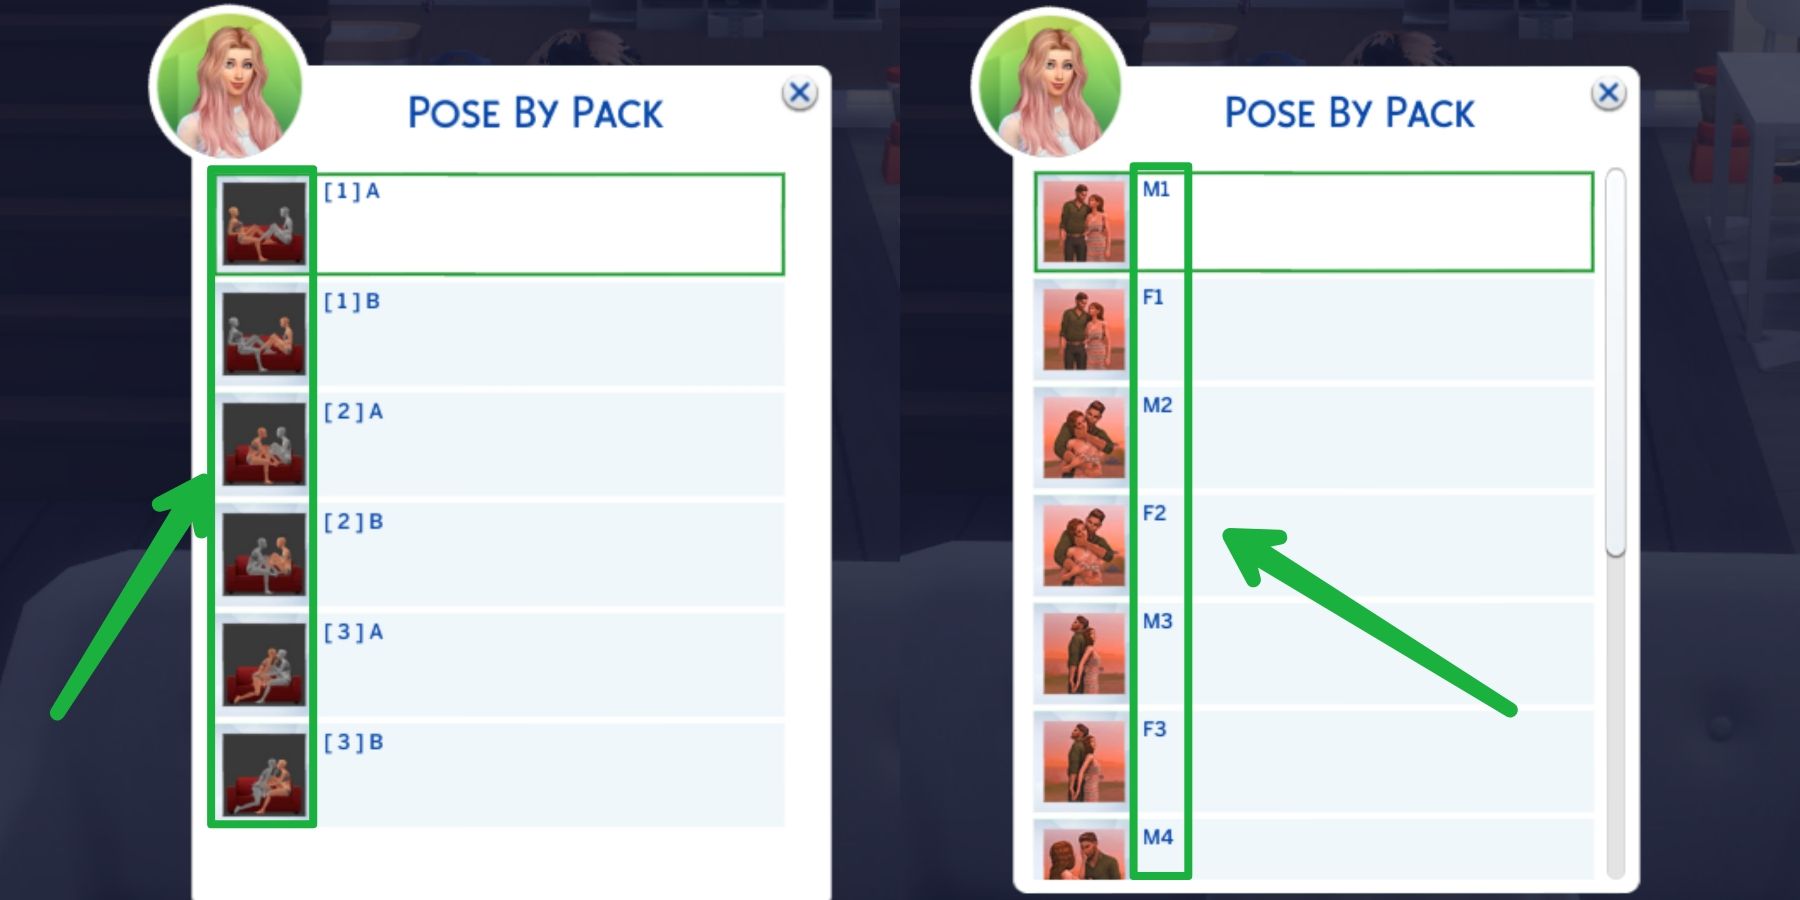 Follow the Leader - The Sims 4 Mods - CurseForge